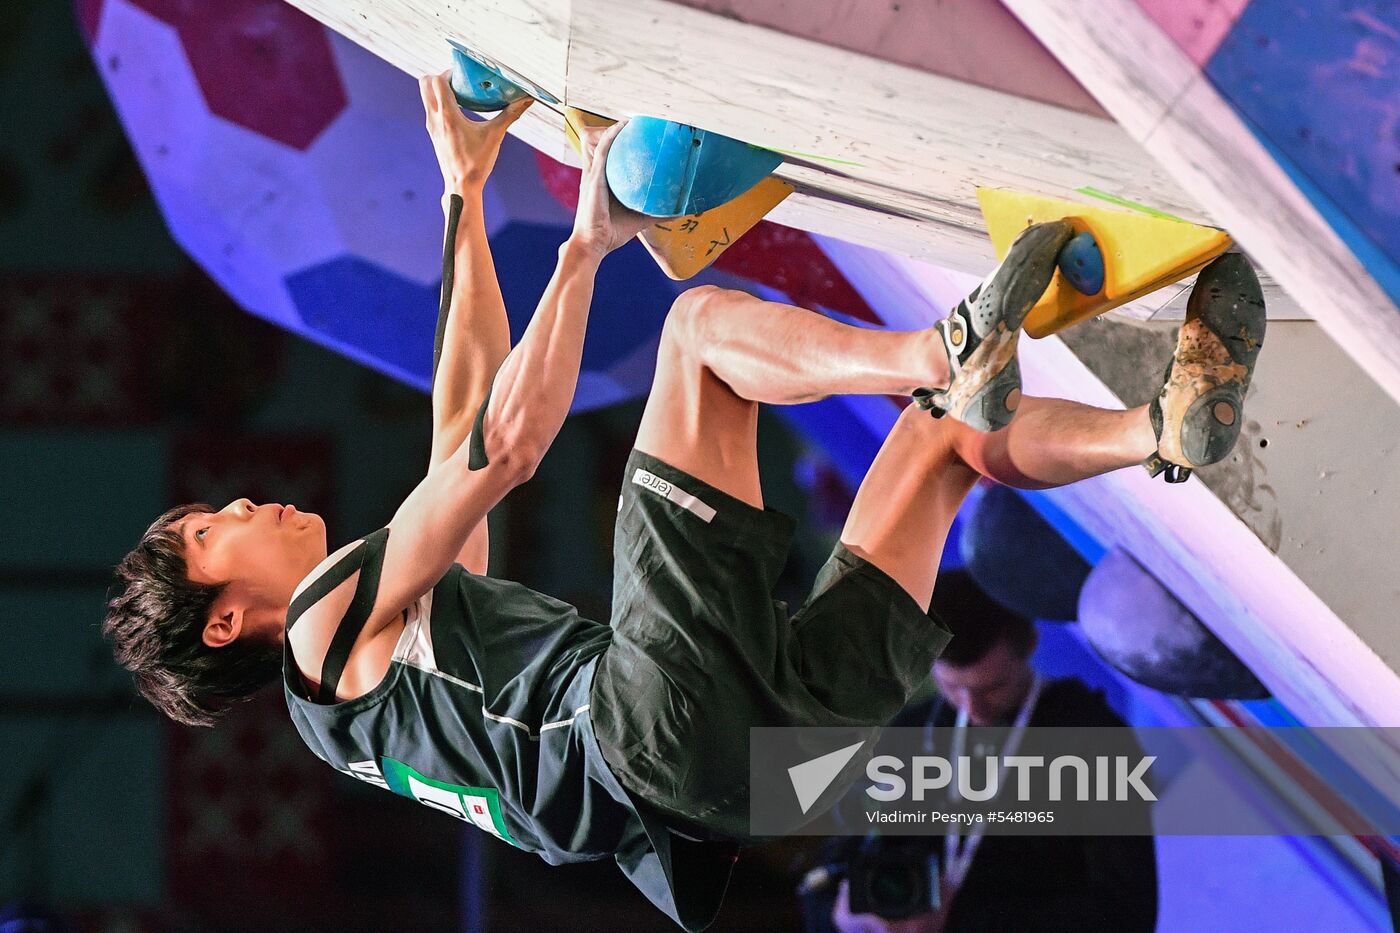 IFSC Climbing World Cup Moscow